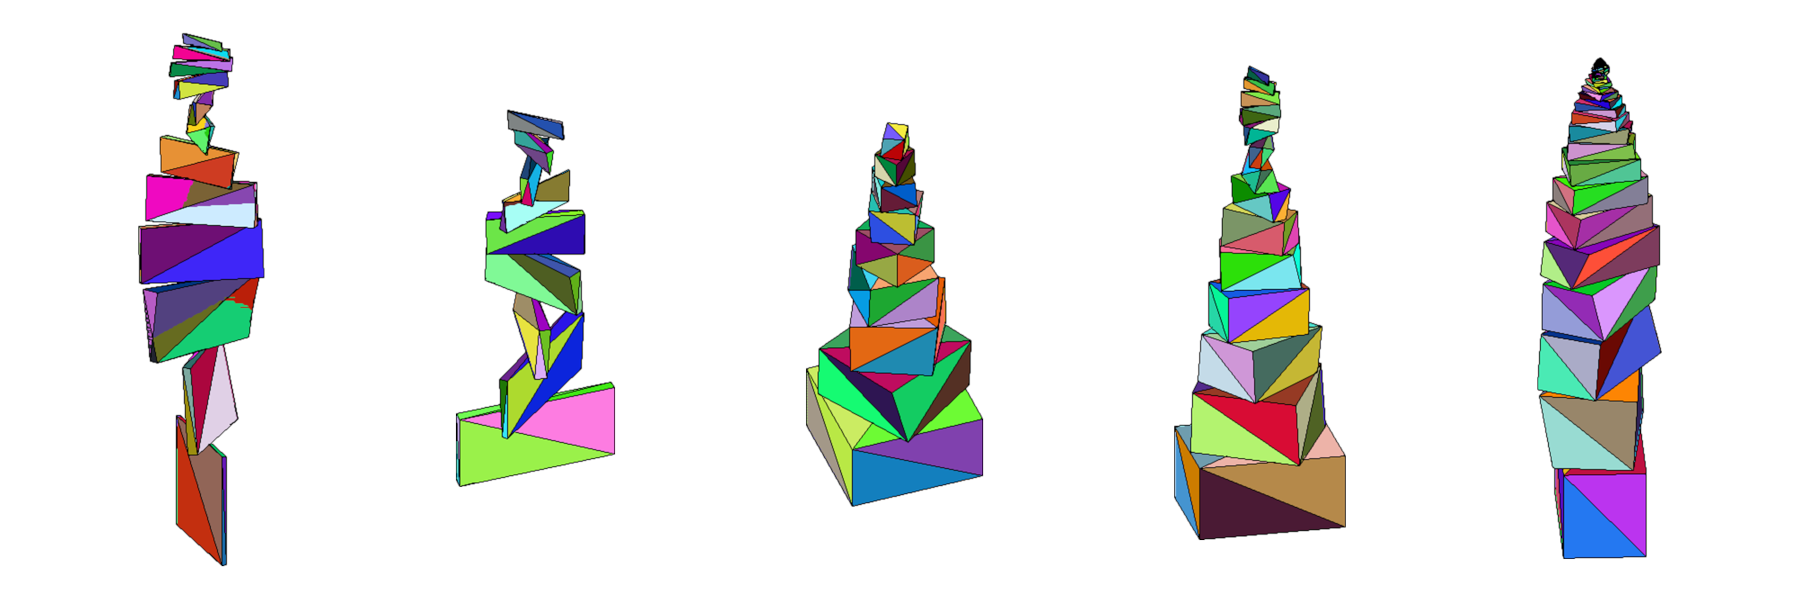 Colorful building block towers - from Spyrals, an art generator by Anton Hoyer coded in MATLAB